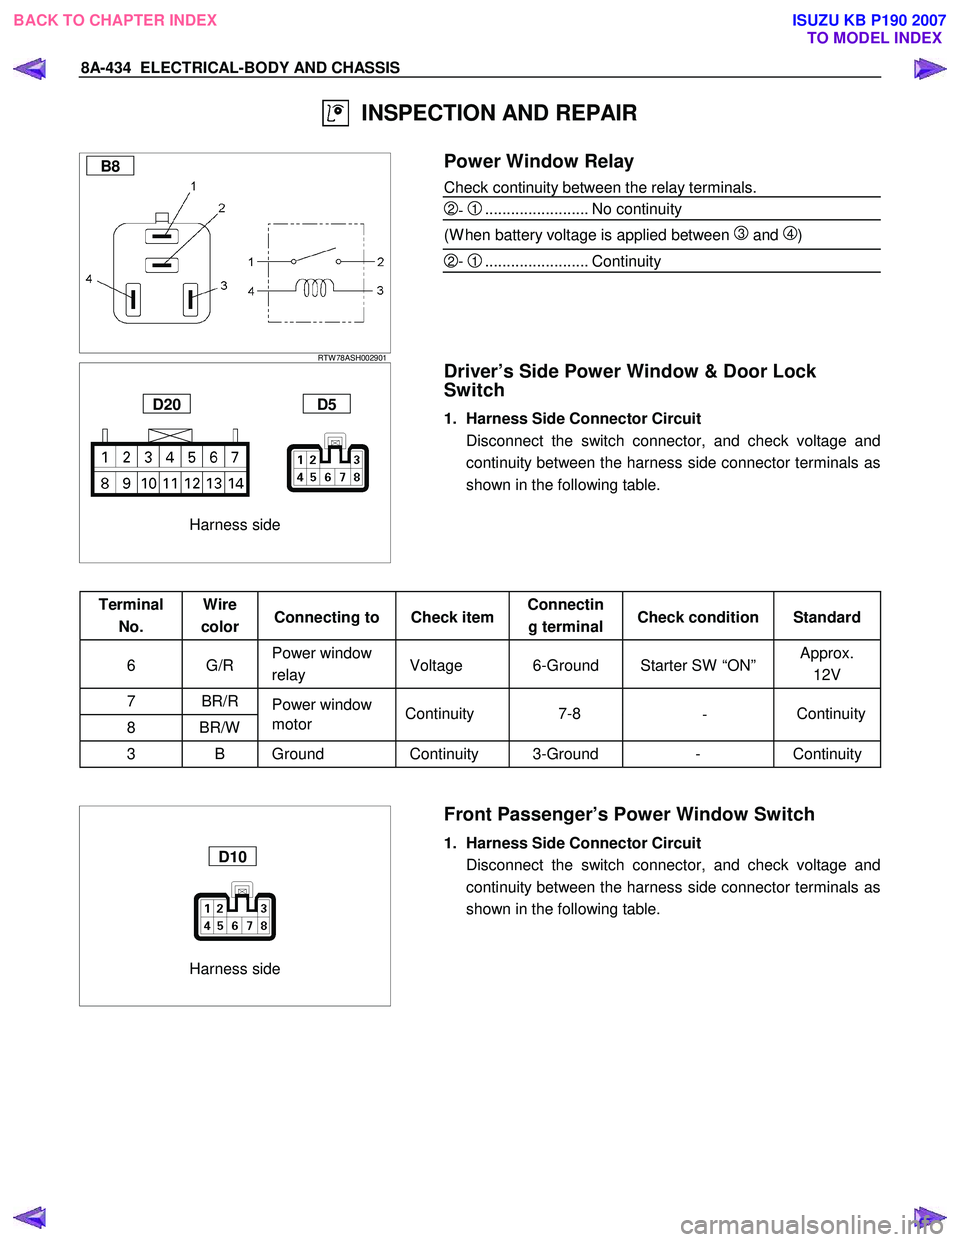 ISUZU KB P190 2007  Workshop Service Manual 8A-434  ELECTRICAL-BODY AND CHASSIS 
  INSPECTION AND REPAIR 
 
   
 
 
 
 
B8 
RTW 78ASH002901 
  
 Power Window Relay 
Check continuity between the relay terminals. 
2-  1........................ No